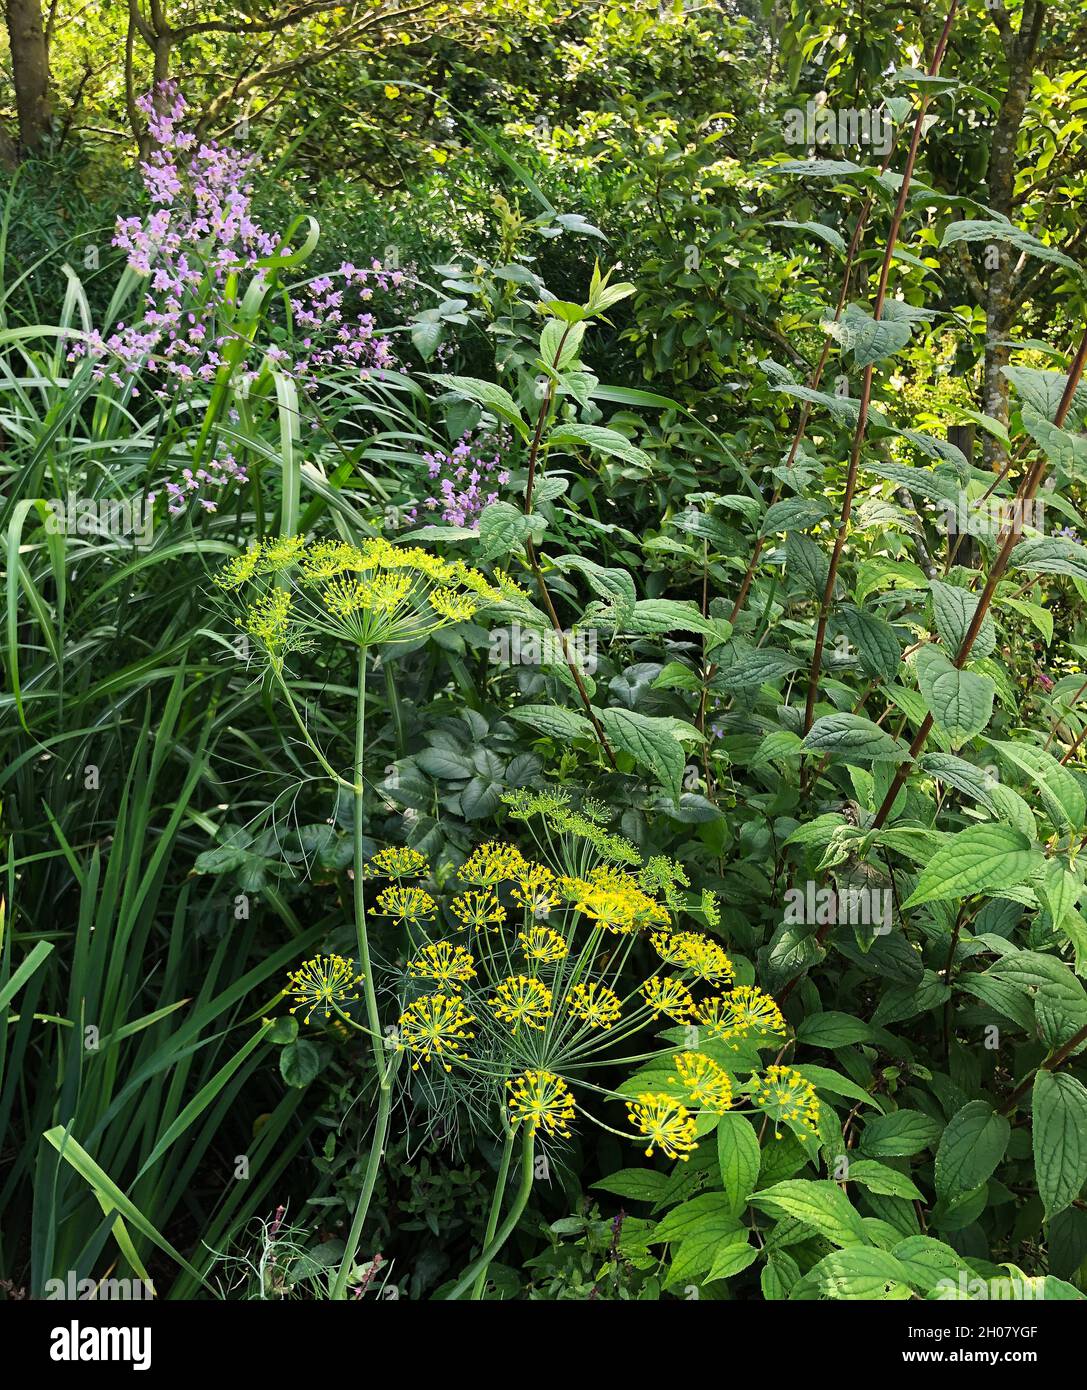 Pastinaca sativa Wild parsnip can be quite massive – up to two metres in height, with many umbels of flowers characteristic of the parsley family – th Stock Photo